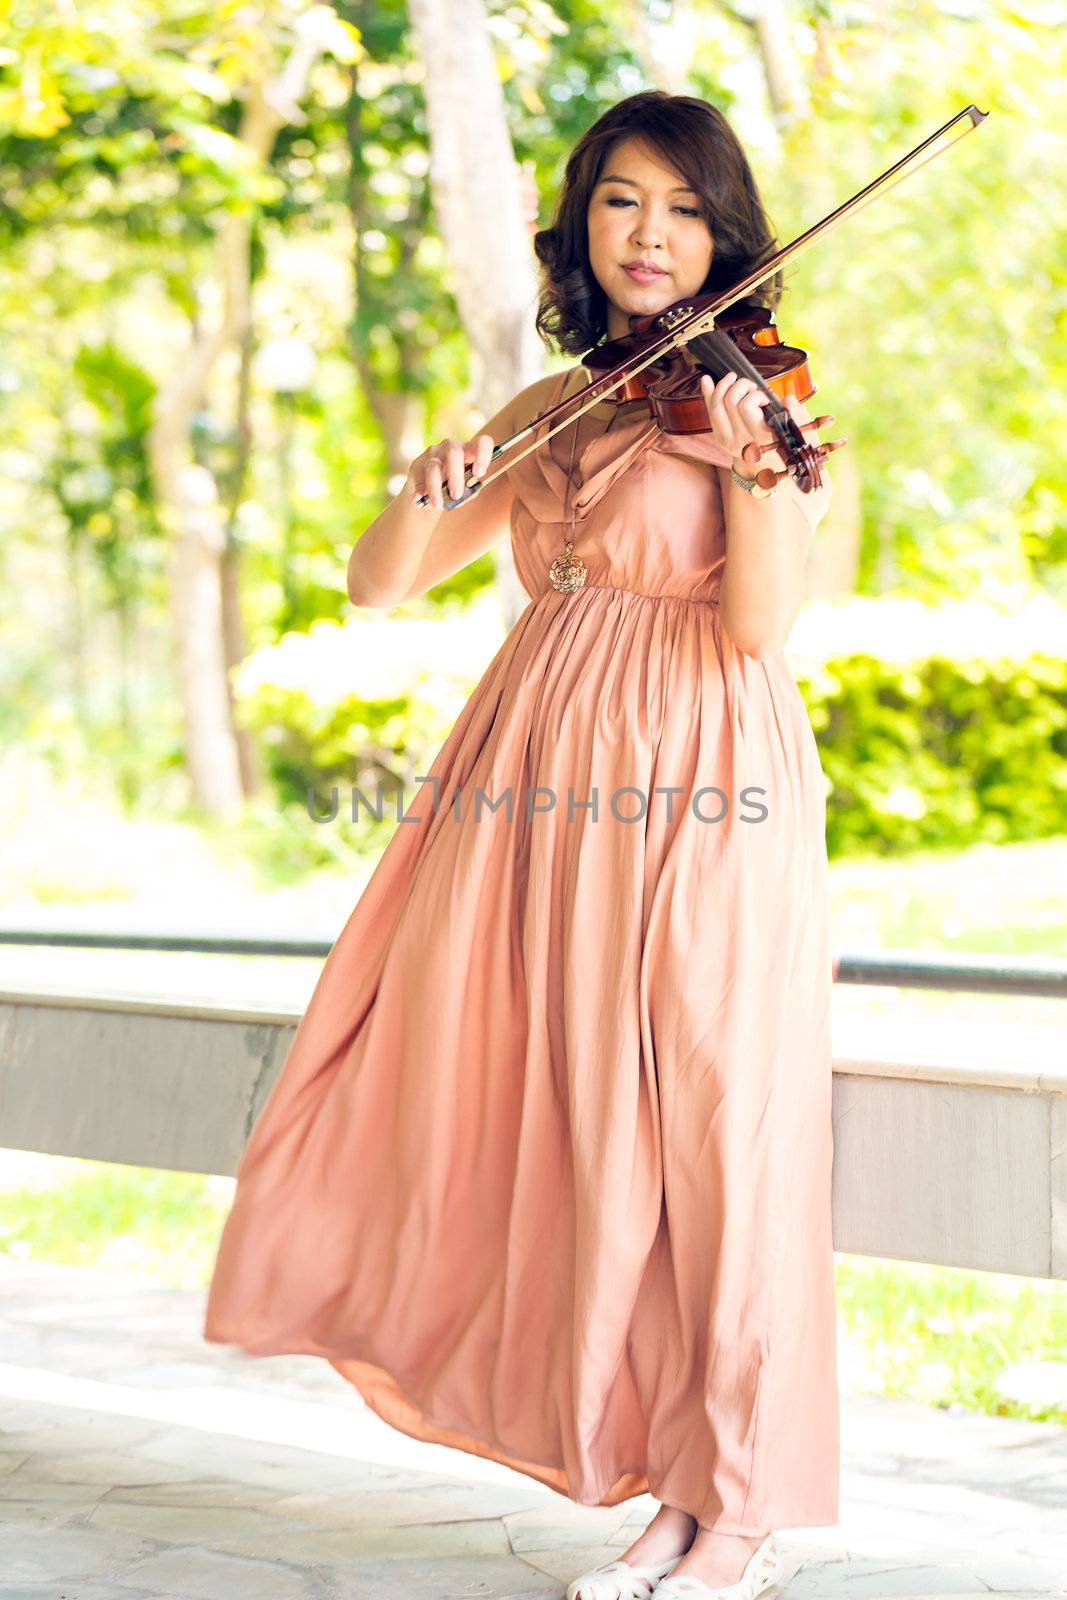 Young woman playing violin in garden